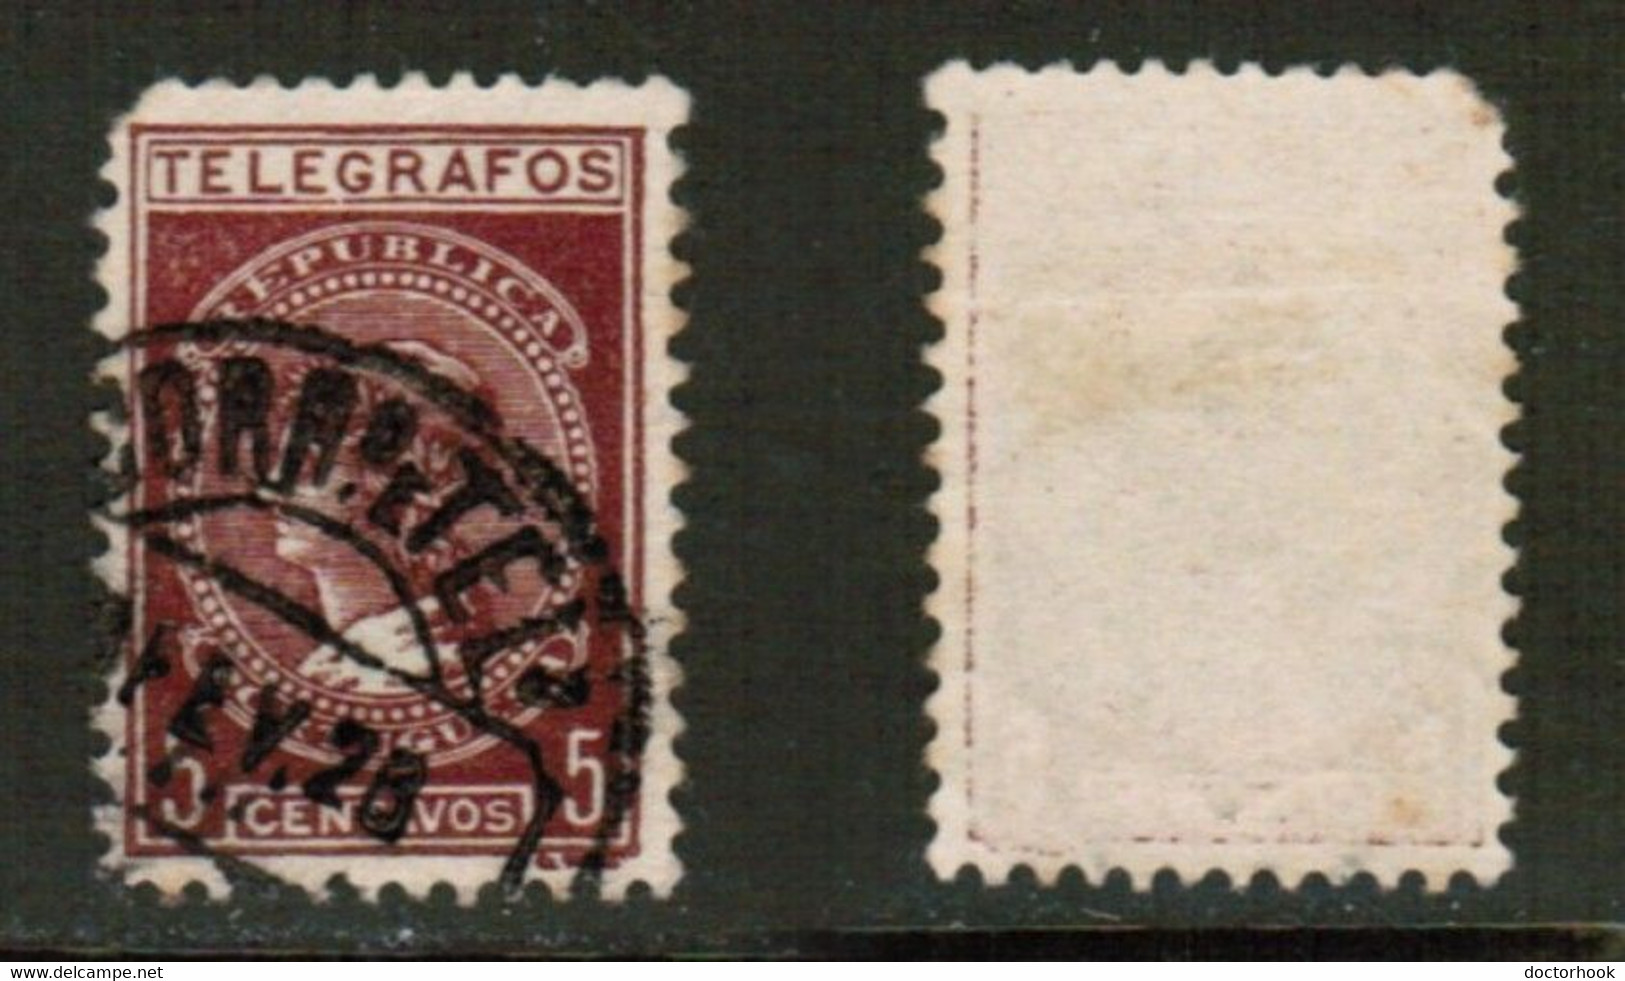 PORTUGAL   TELEGRAPH STAMP USED (CONDITION AS PER SCAN) (Stamp Scan # 839-4) - Oblitérés